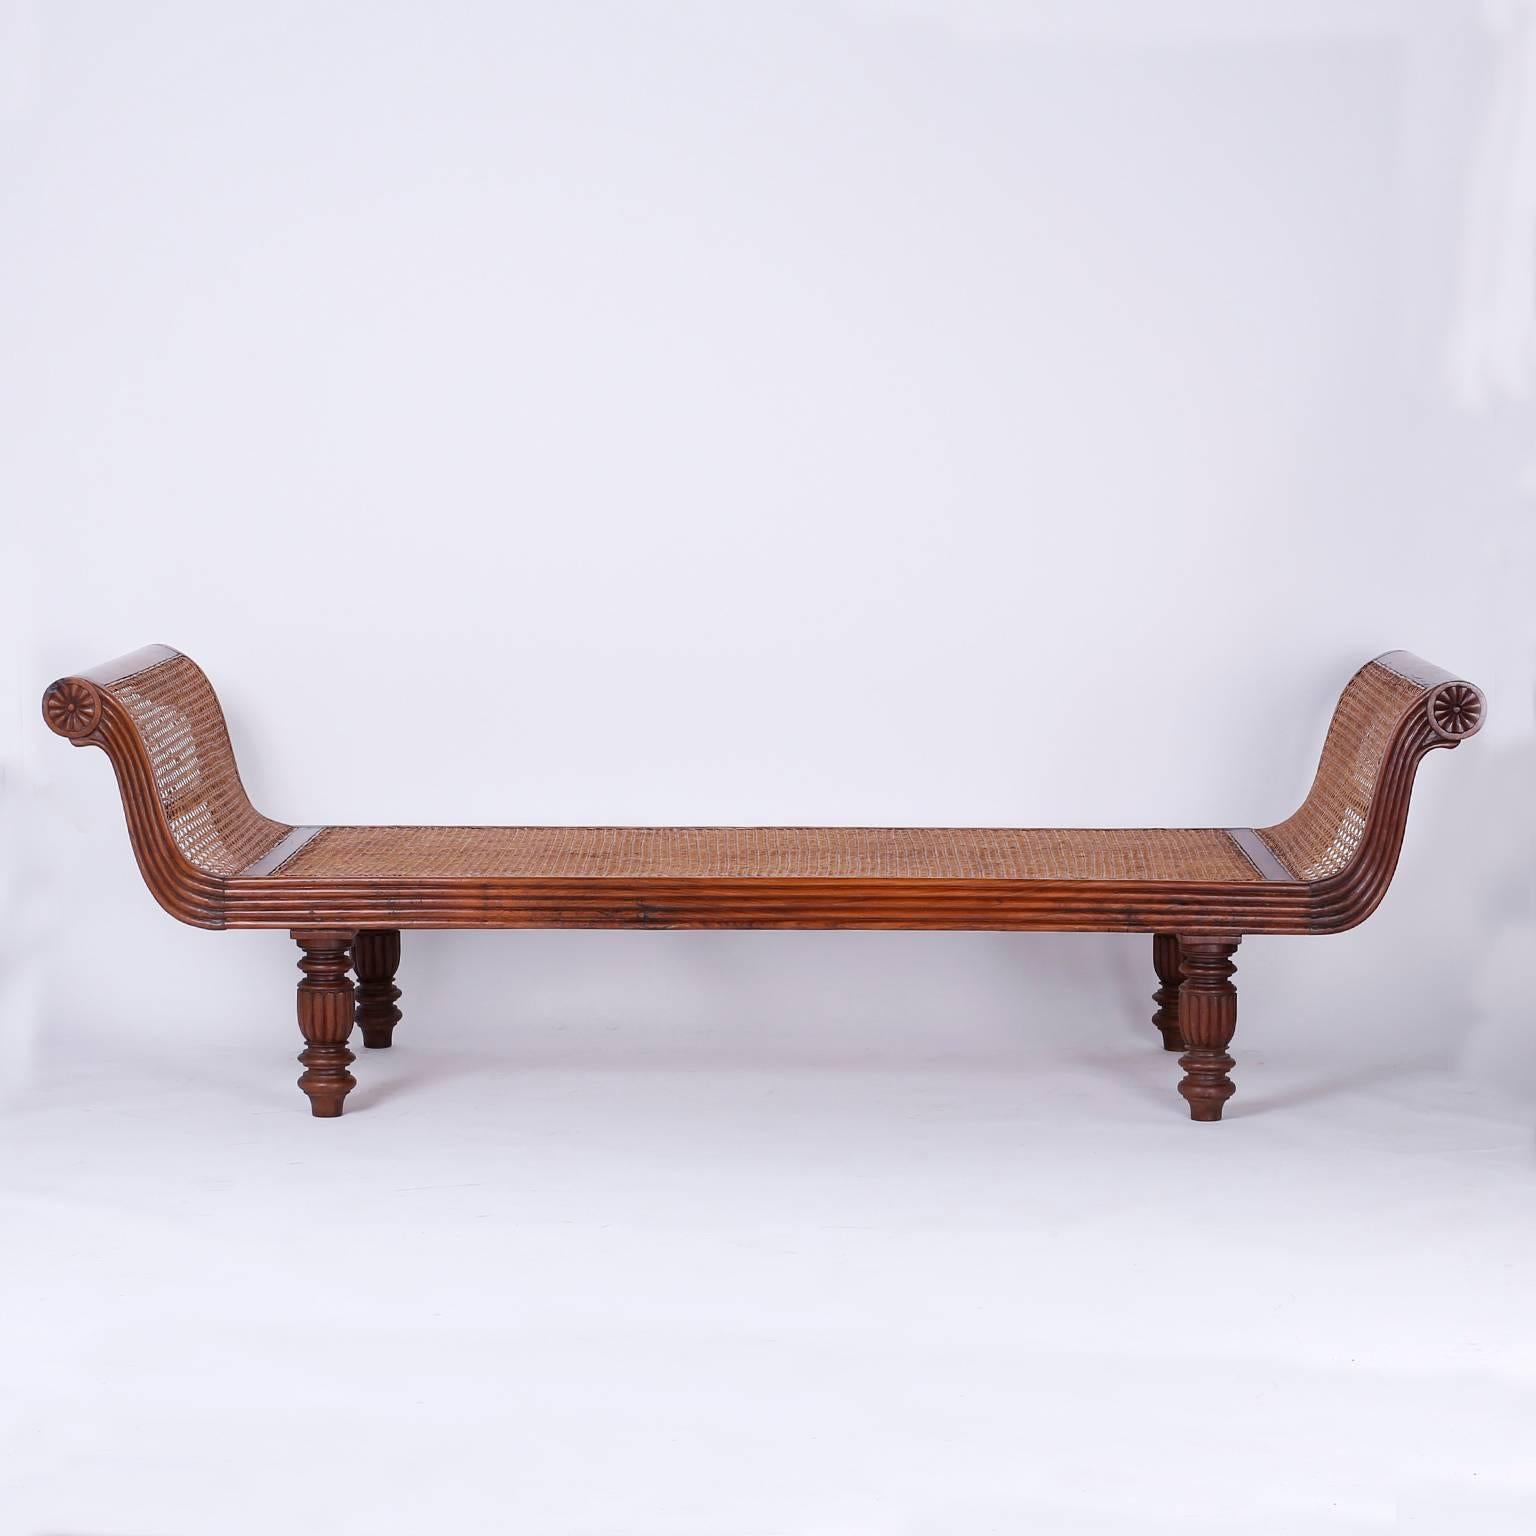 British Colonial, West Indies style daybed, chaise, or backless sofa crafted with indigenous exotic hard woods with a graceful flowing form. Hand caned from head to foot for tropical comfort and supported by four Classic turned and beaded legs.